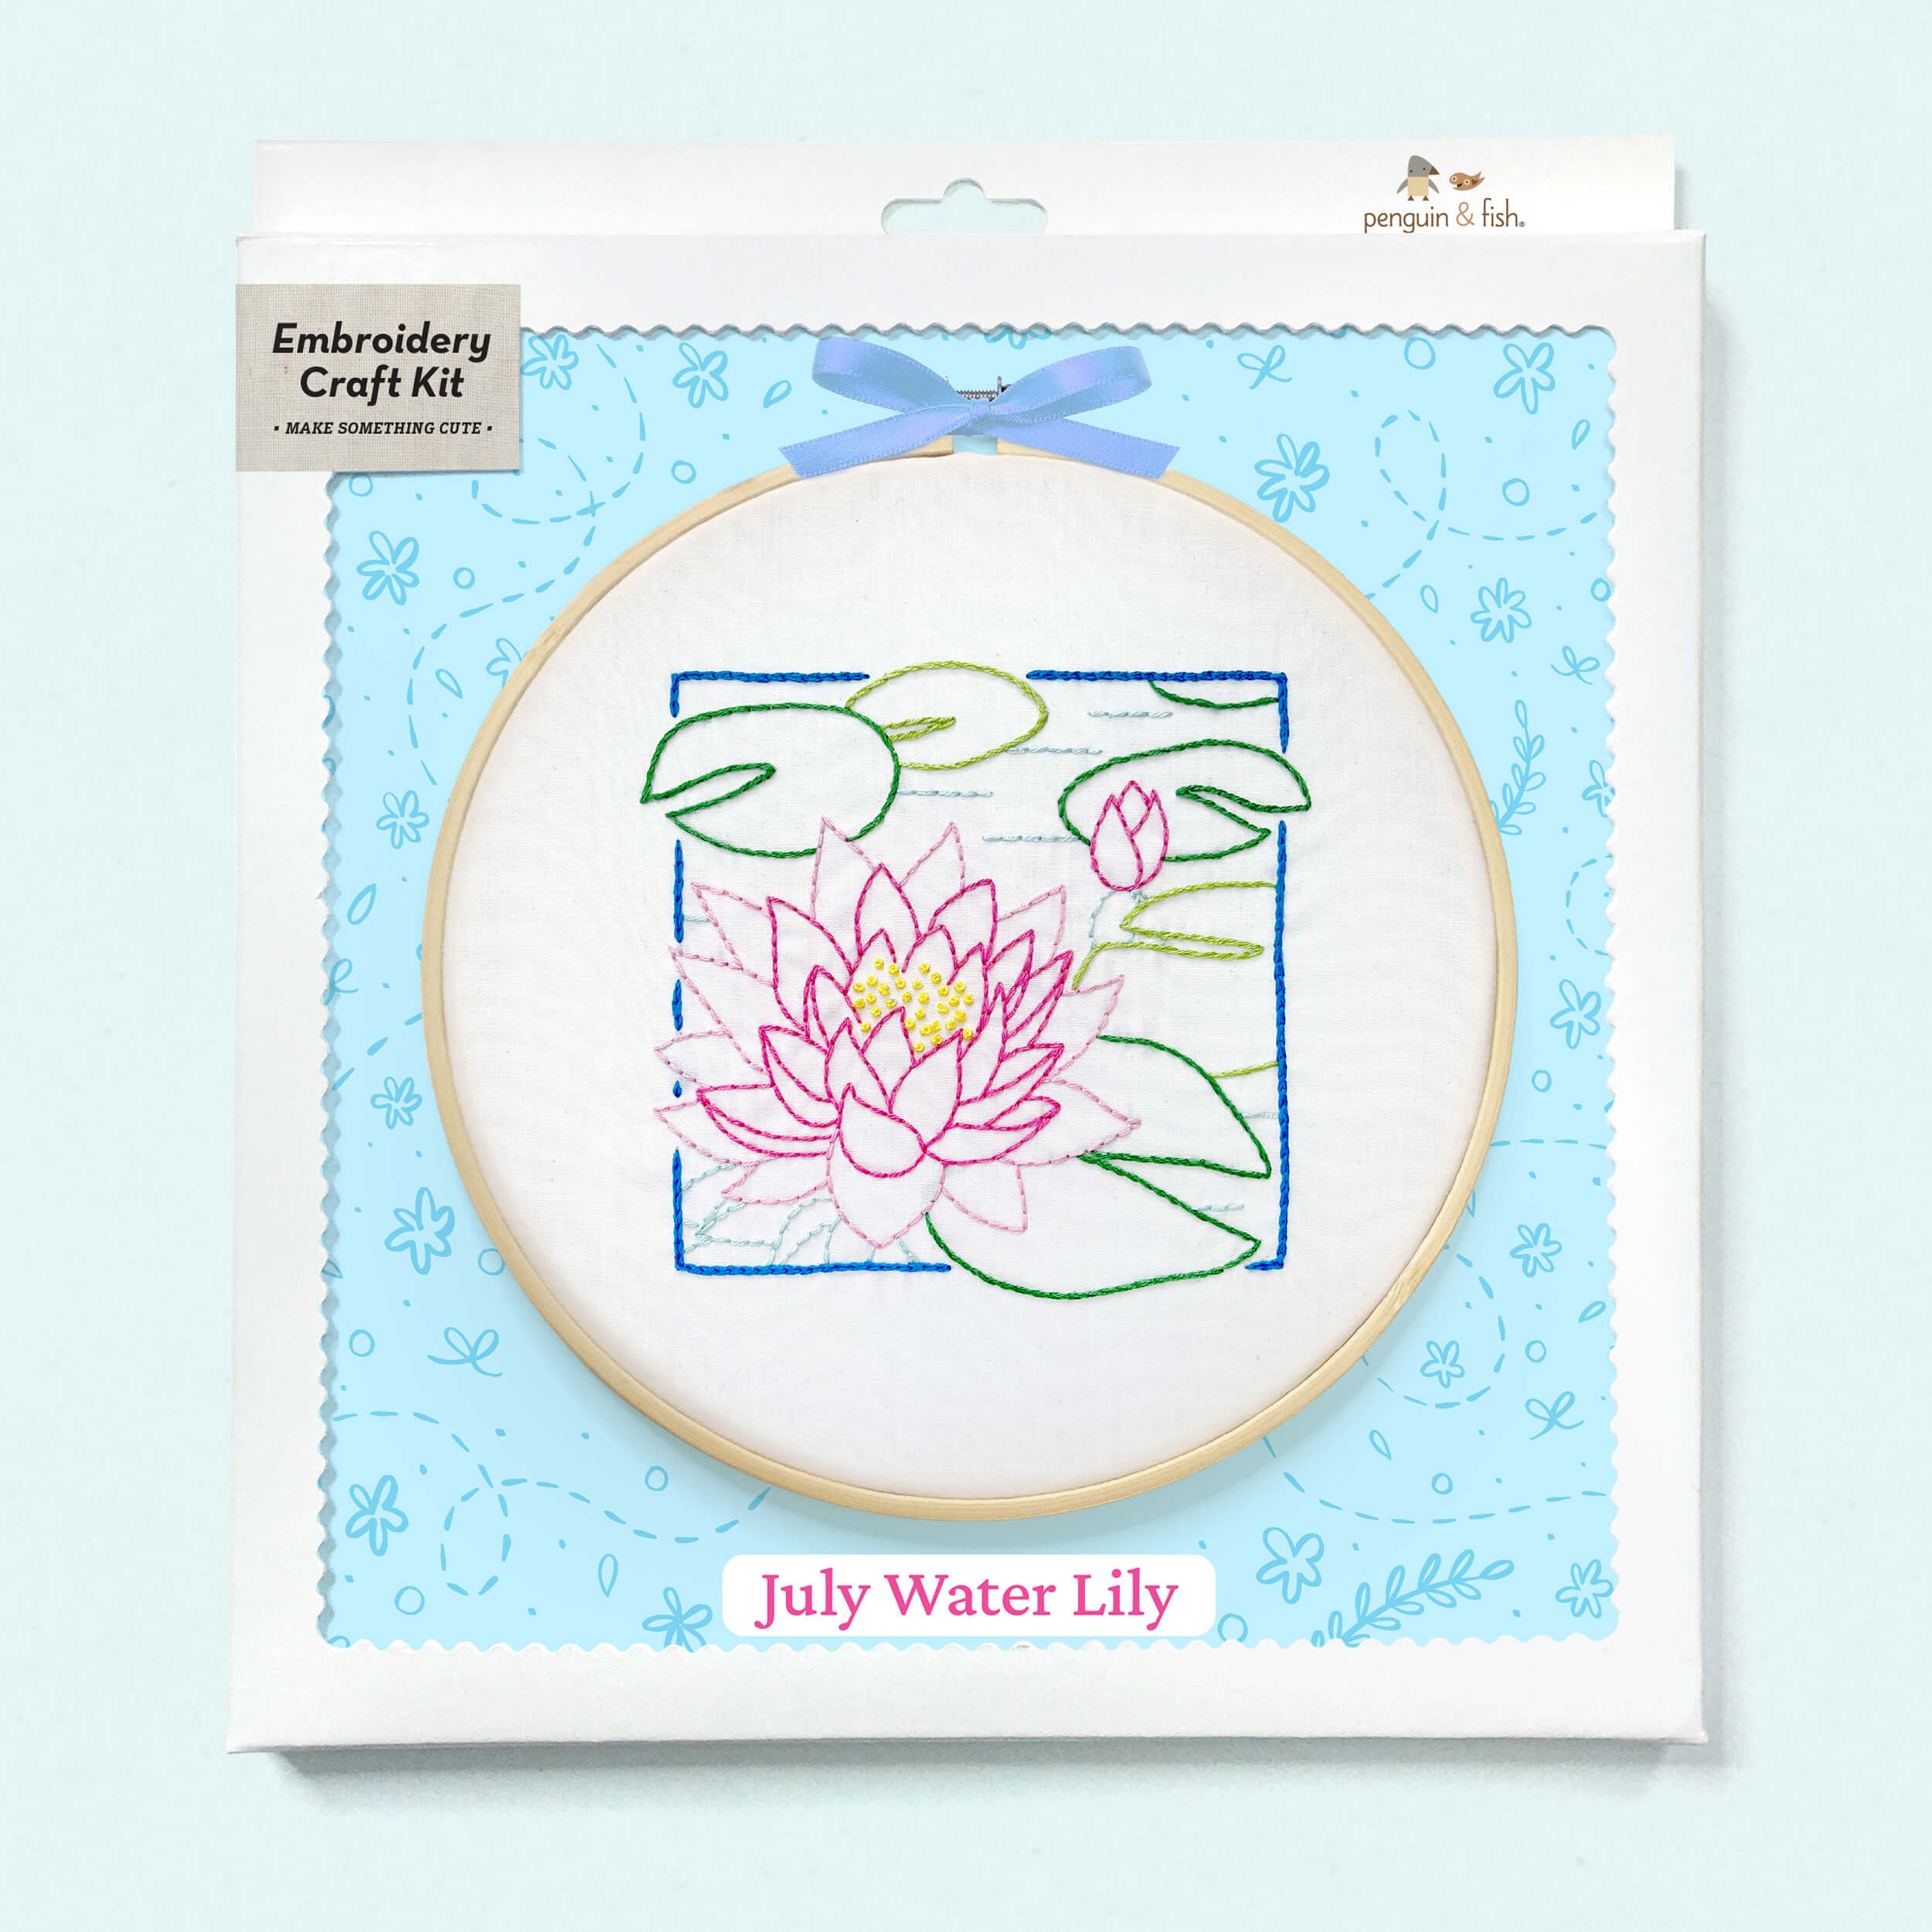 July Water Lily embroidery kit in a box